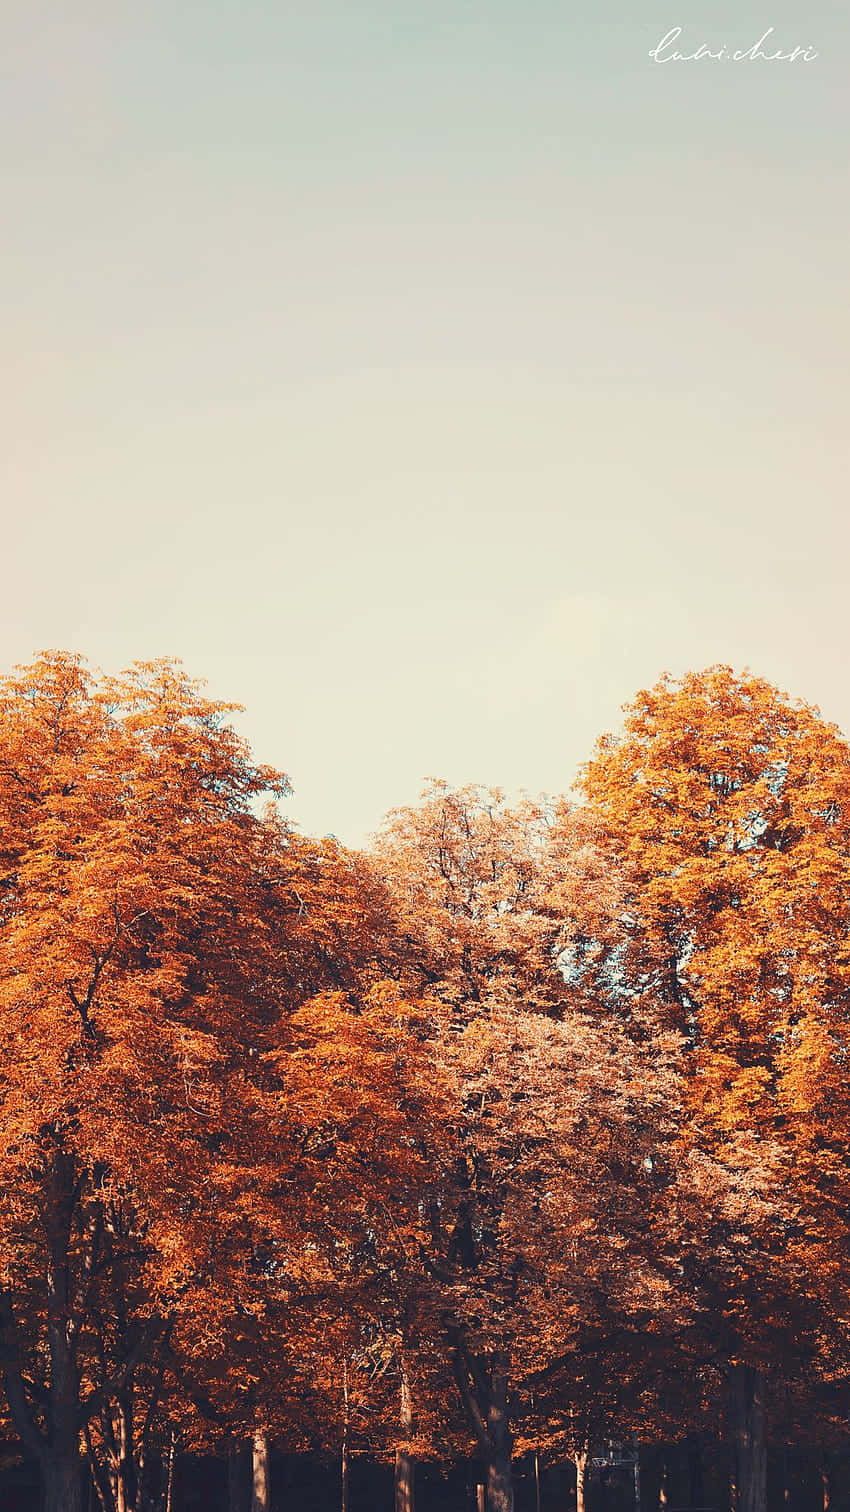 A wallpaper of trees with orange leaves in the fall - Vintage fall